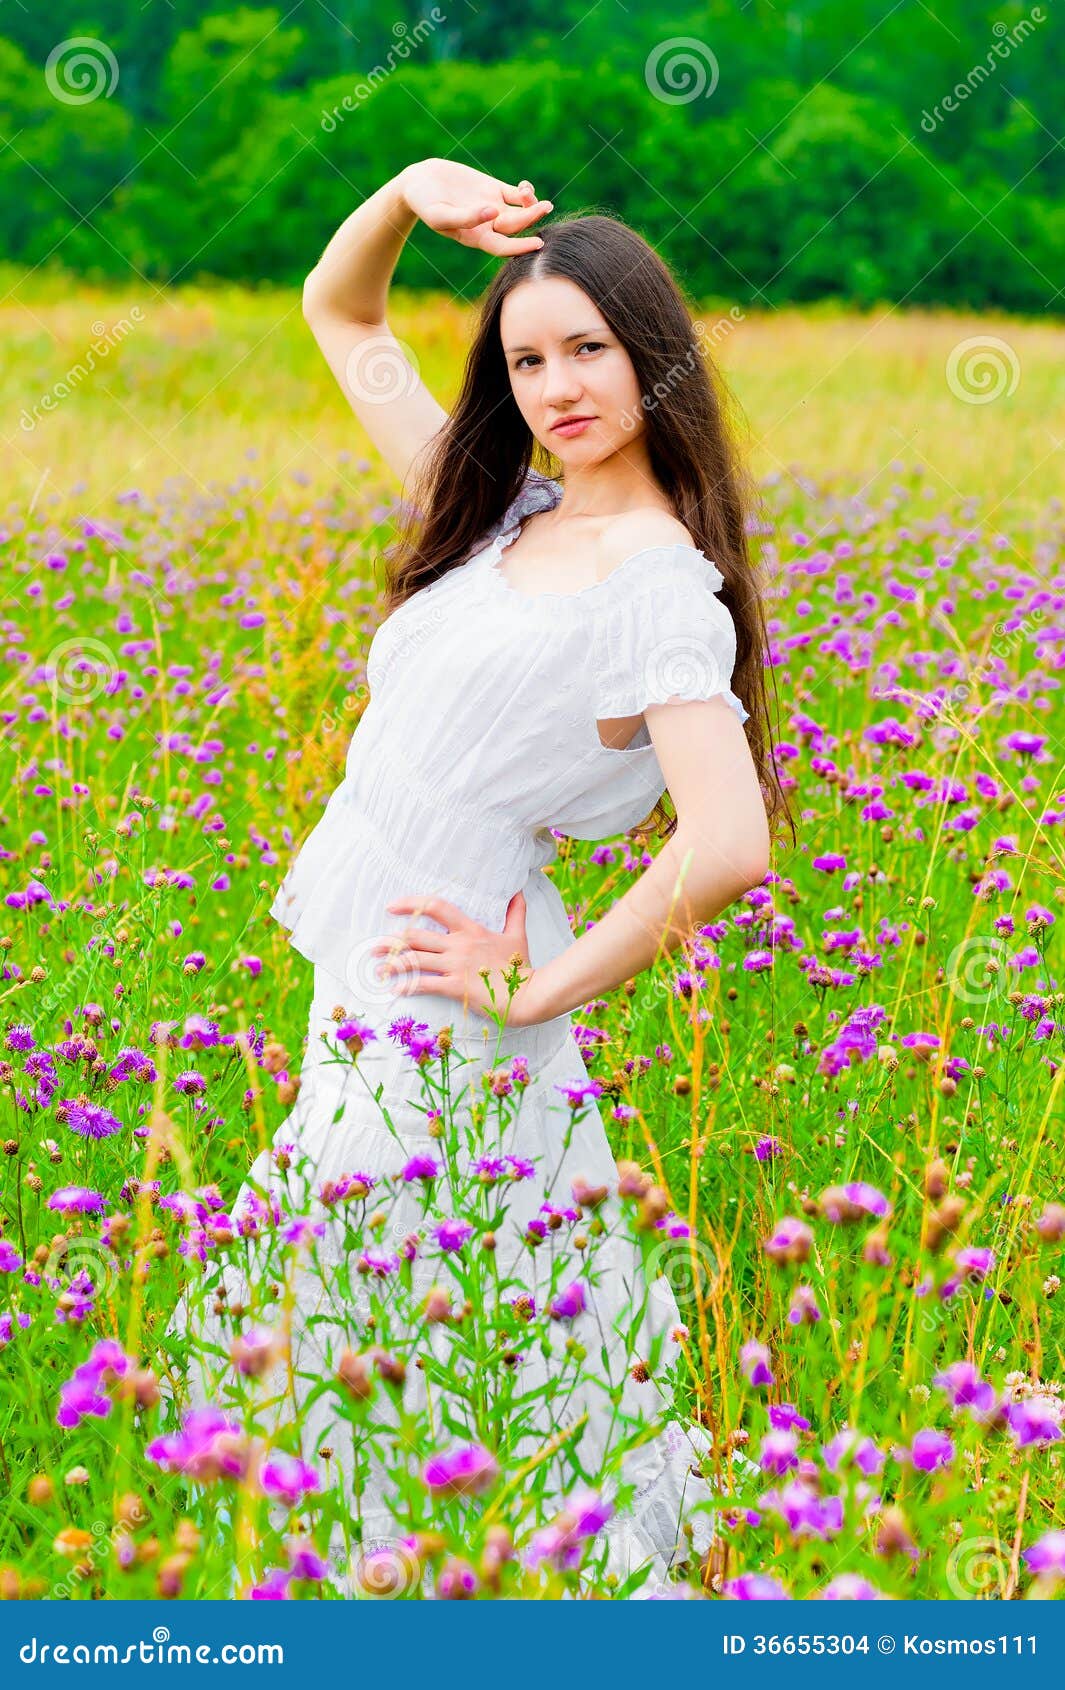 Beautiful Woman Posing in a Field with Flowers Stock Photo - Image of ...